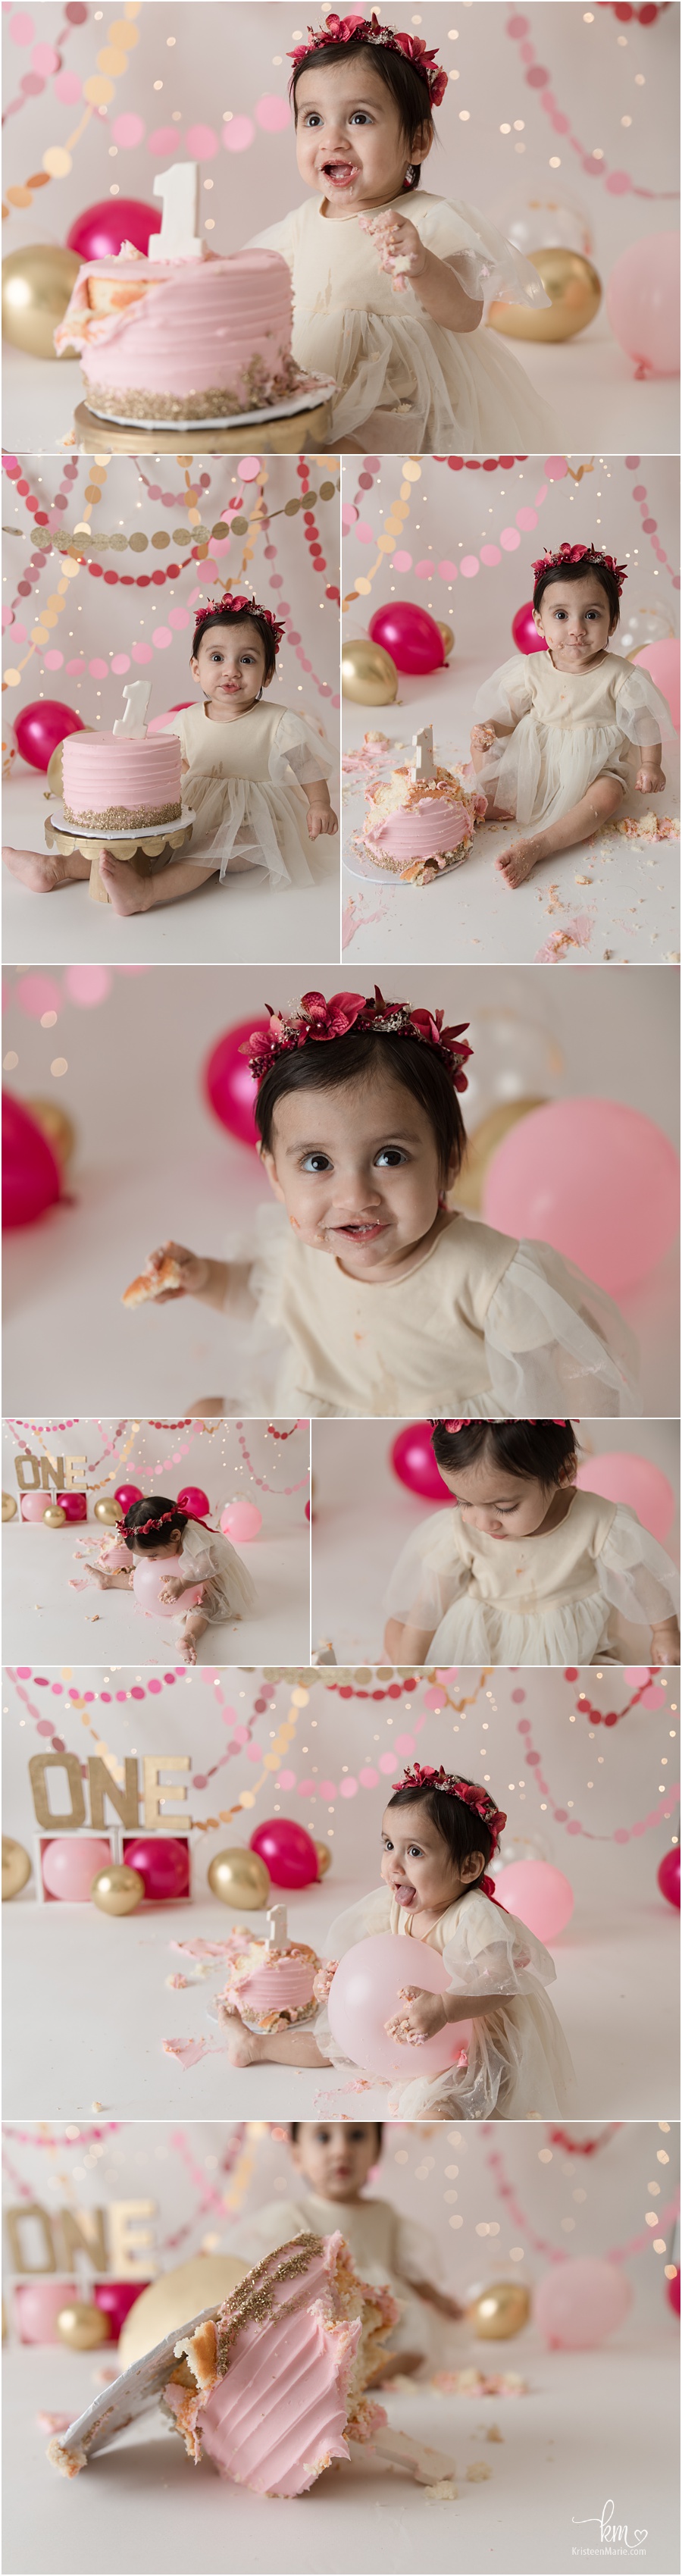 pink and gold 1st birthday cake smash session - KristeenMarie Photography